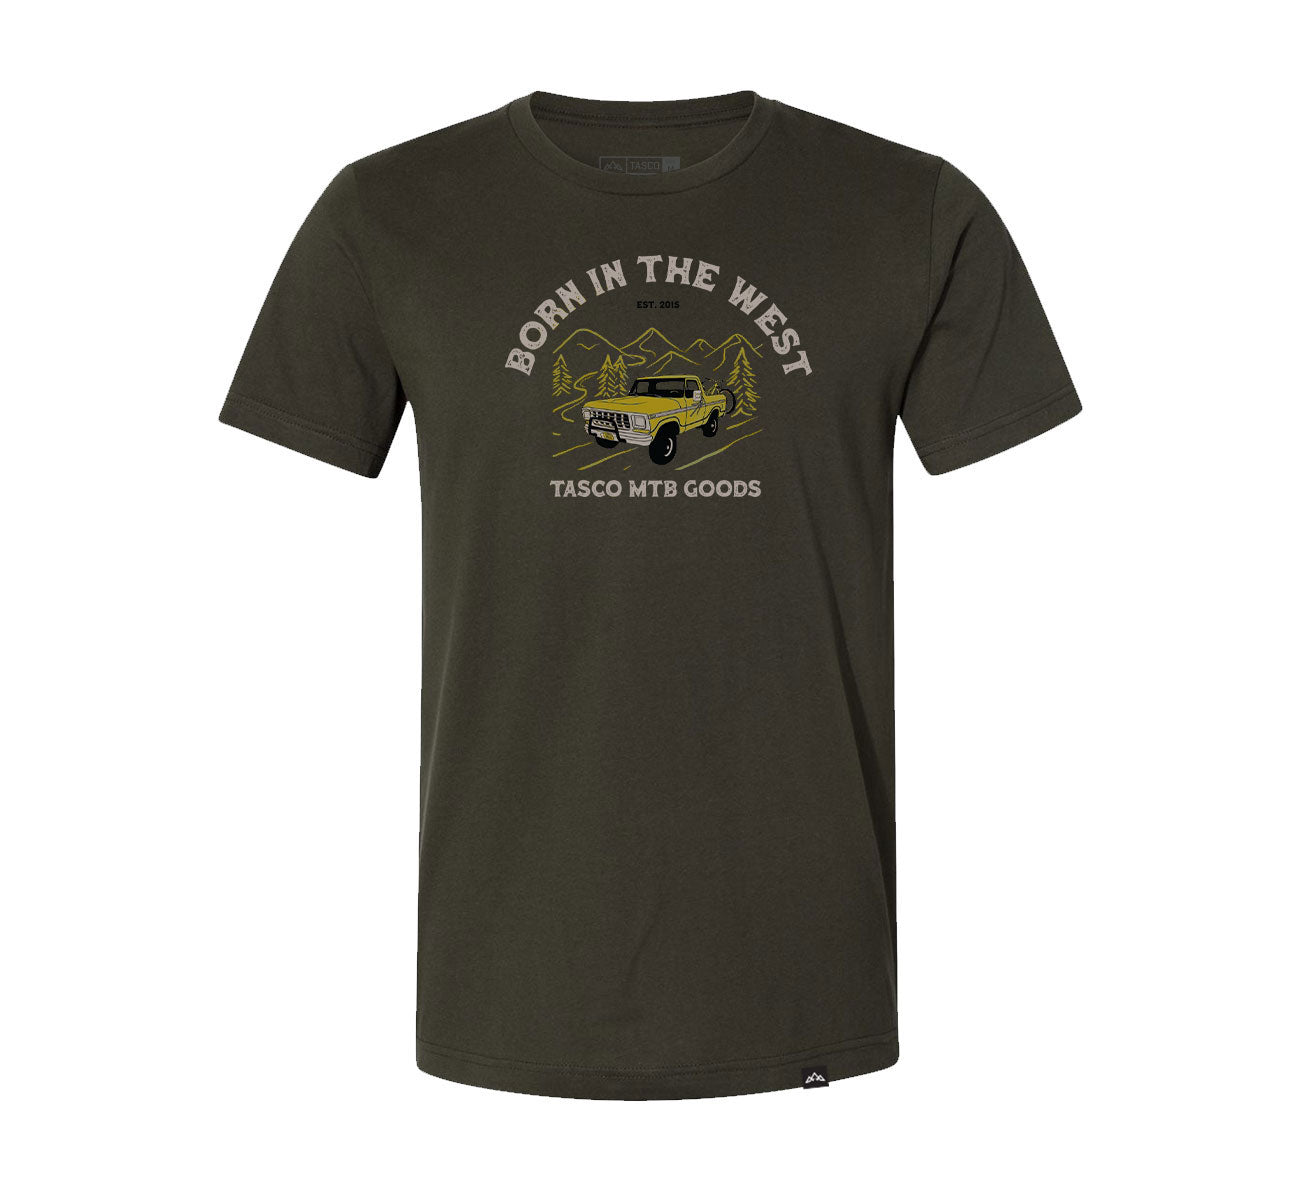 TASCO MTB- Out West T Shirt Green with Yellow Vintage truck. Hand drawn